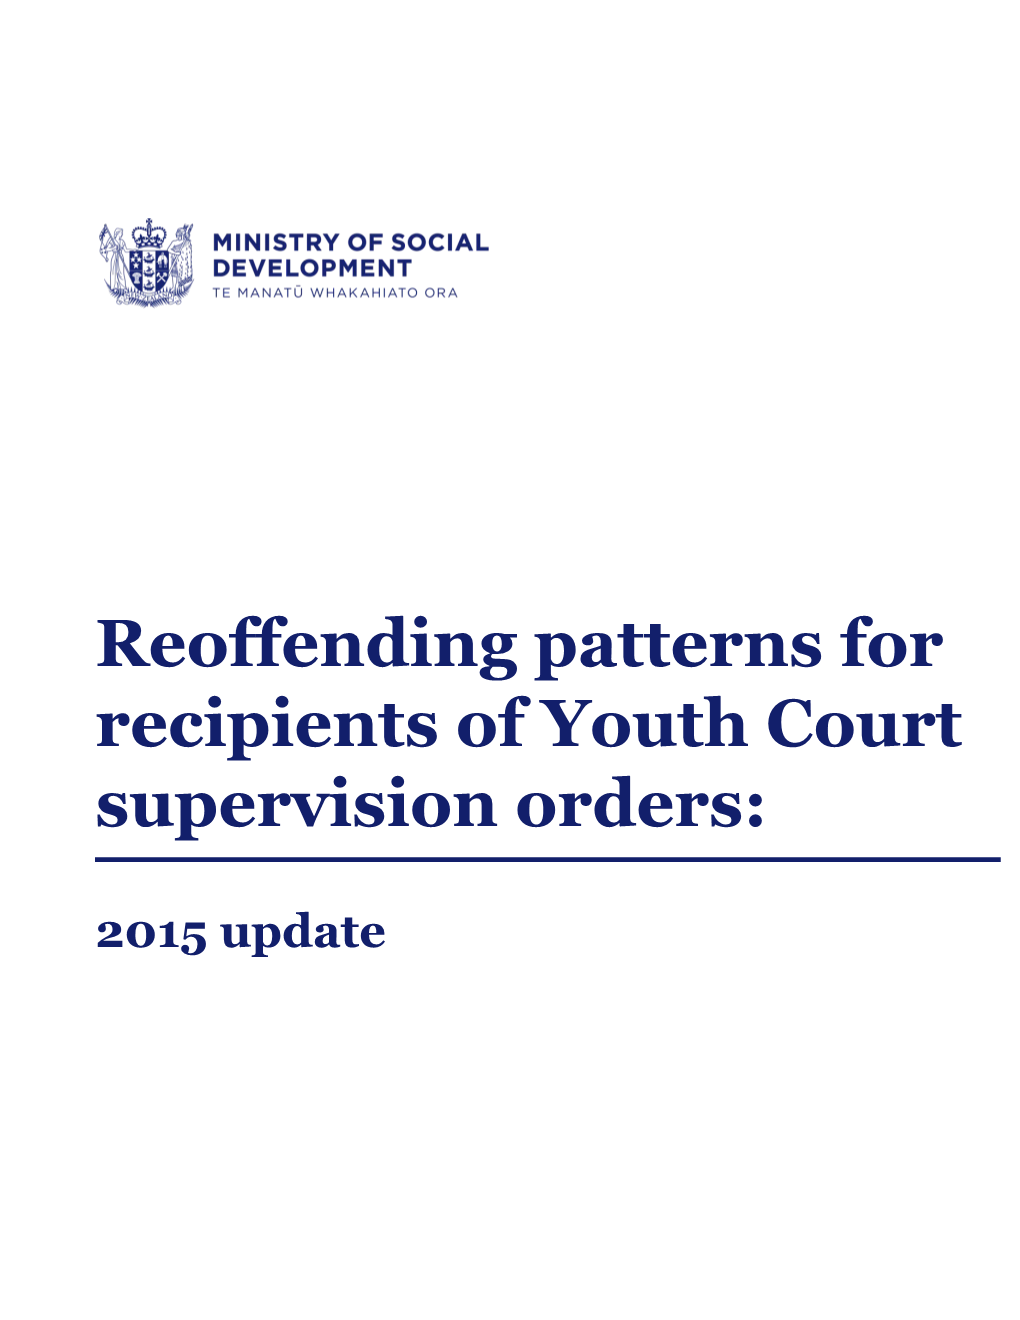 Reoffending Patterns for Recipients of Youth Court Supervision Orders